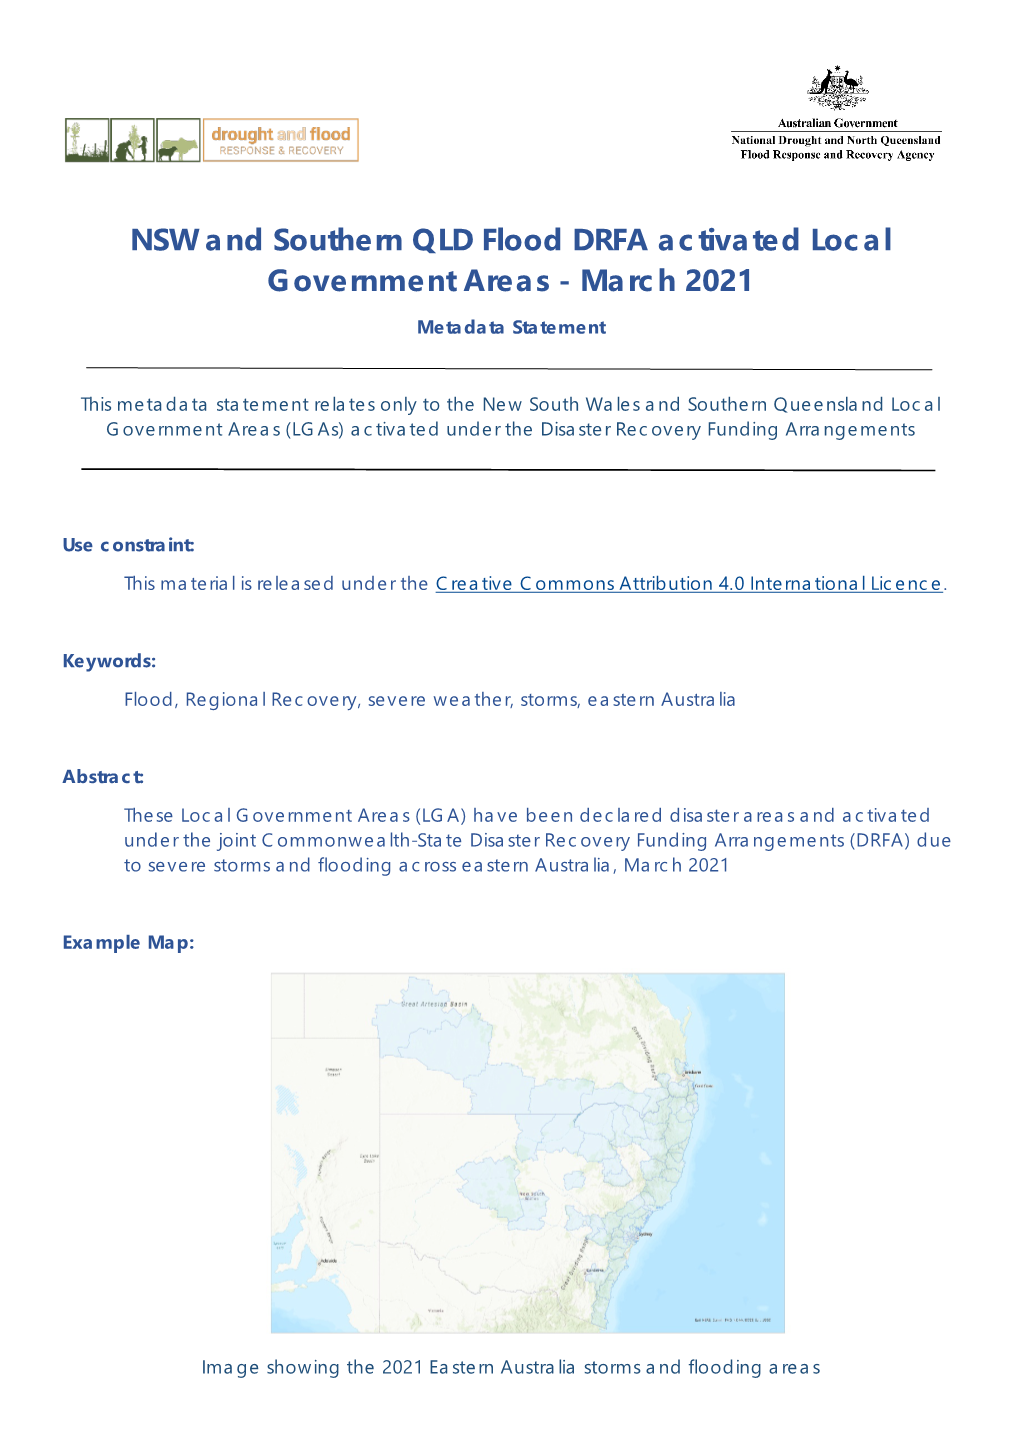 NSW and Southern QLD NDRA Activated Lgas March 2021